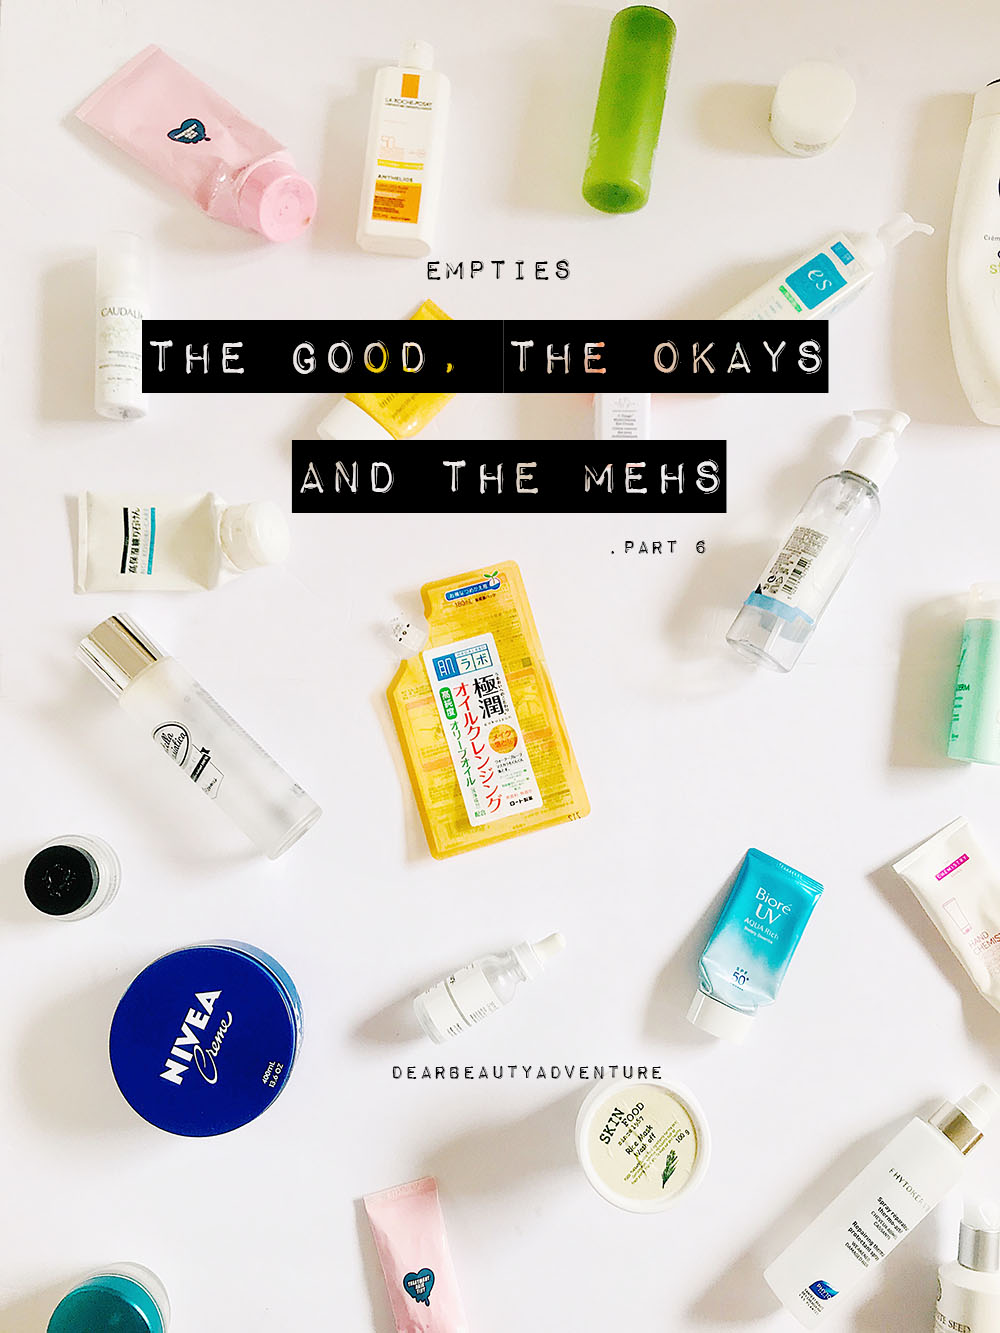 In this post is the review of my empties. Check out which products are good, okay and meh